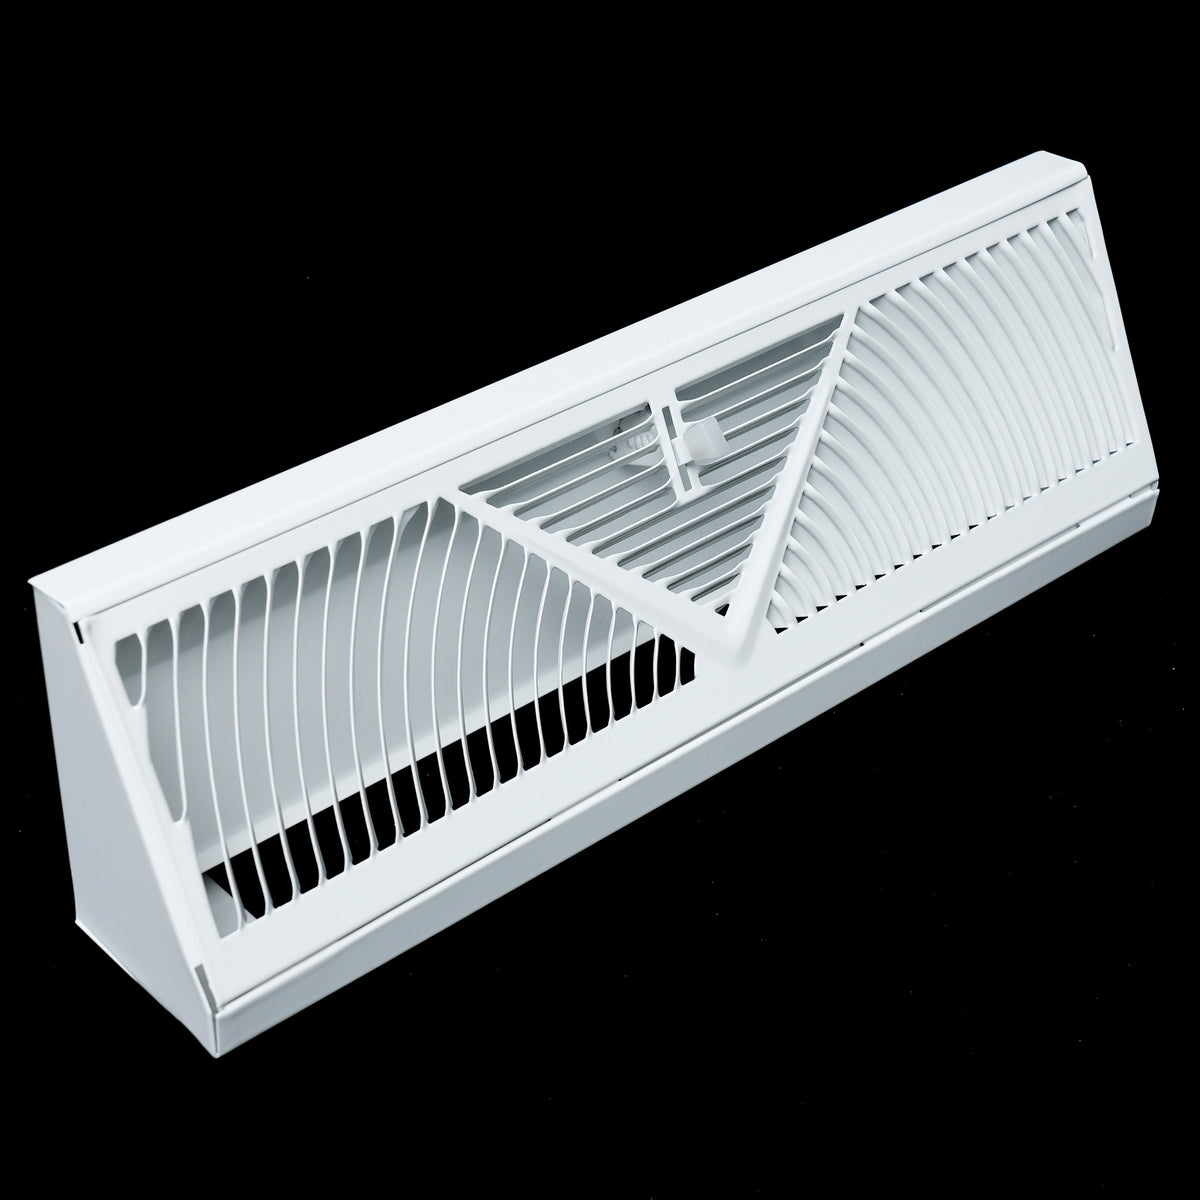 airgrilles 15" corner baseboard return air grille  -  round type air flow design  -  register vent cover grill  -  adjustable lever for air flow control  -  white hnd-cbb-wh-15  - 1